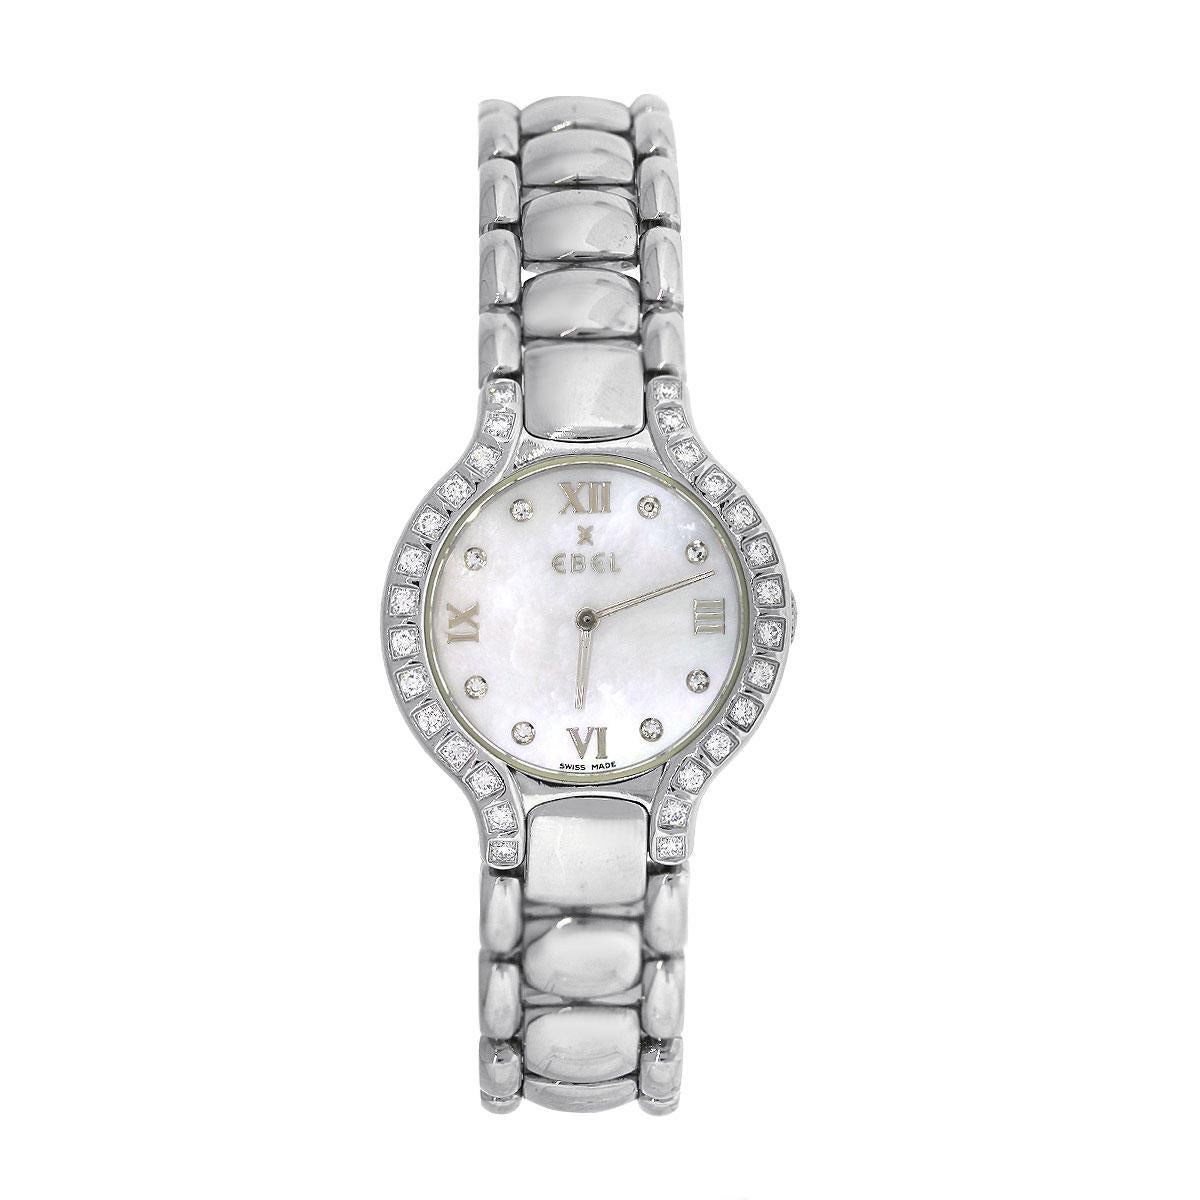 Brand: Ebel
Style: Beluga
MPN: 9157428-20
Case Material: Stainless steel
Case Diameter: 27mm
Bezel: Stainless steel fixed diamond bezel
Dial: Mother of pearl dial with diamond and roman dial markers
Bracelet: Stainless steel
Crystal: Sapphire
Size: